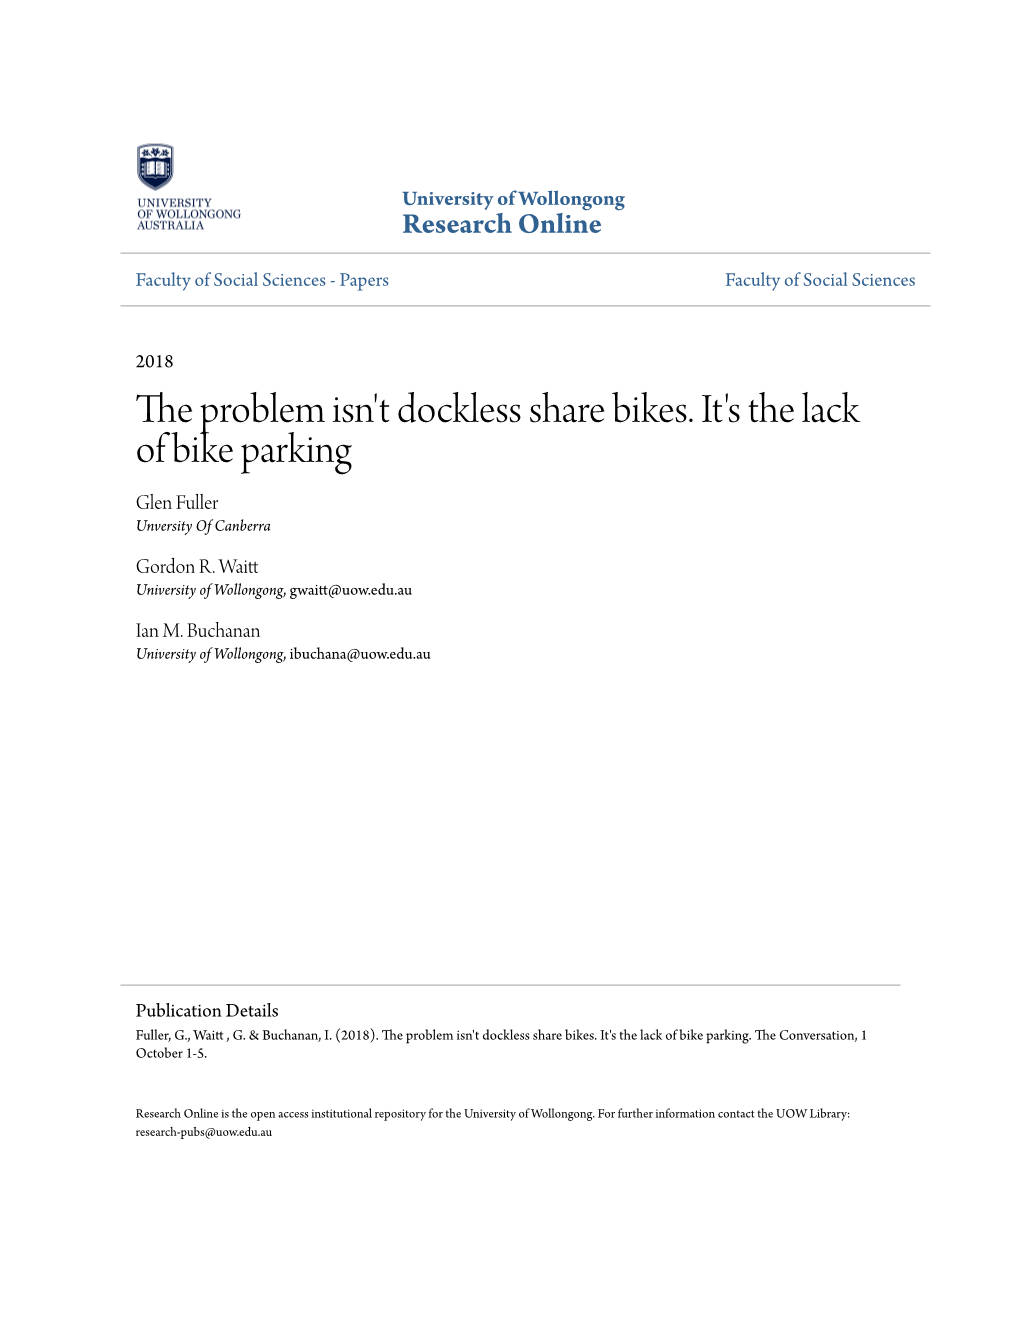 The Problem Isn't Dockless Share Bikes. It's the Lack of Bike Parking Glen Fuller Unversity of Canberra